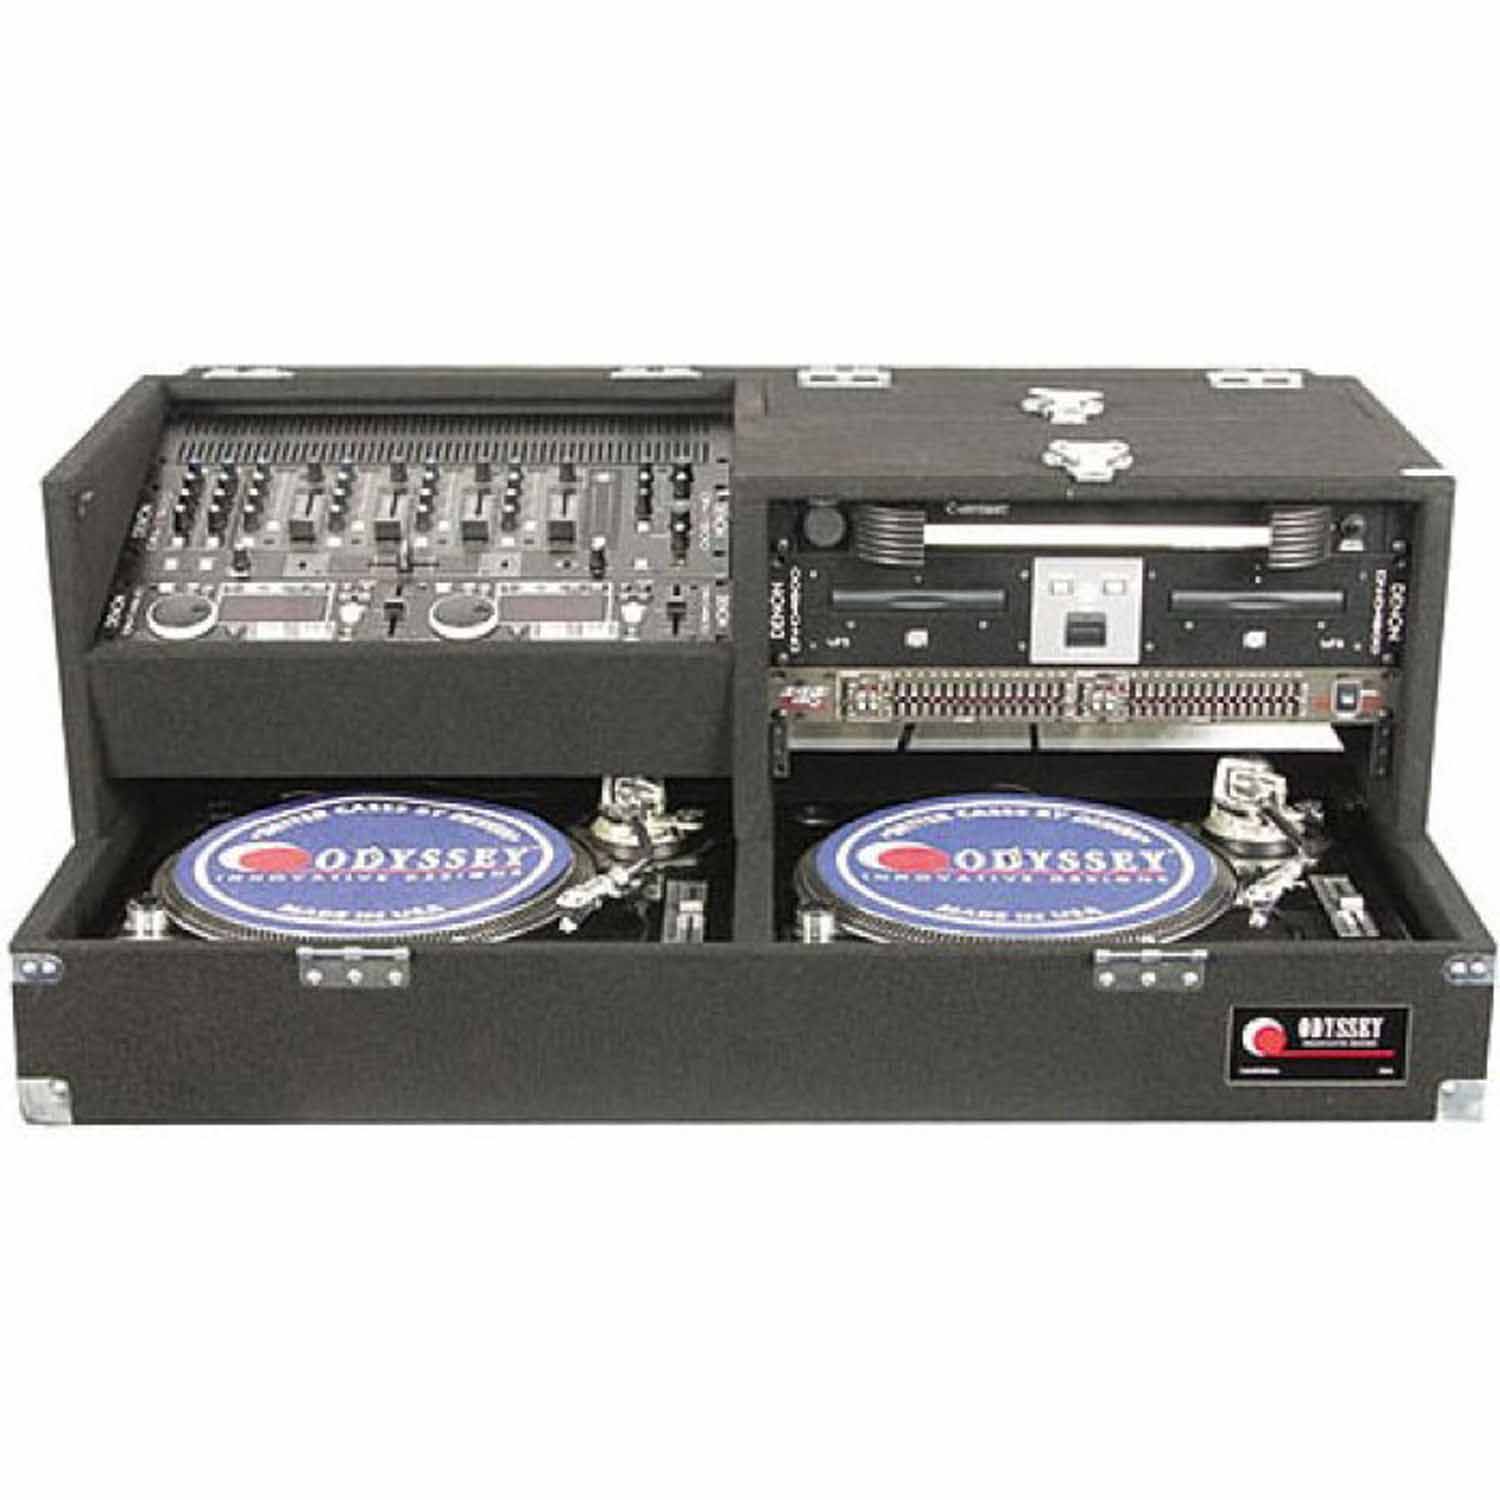 B-Stock: Odyssey CS132T Twin Rack 2 Turntable Case With 8U Slide-Back and 5U Rack Space - Hollywood DJ